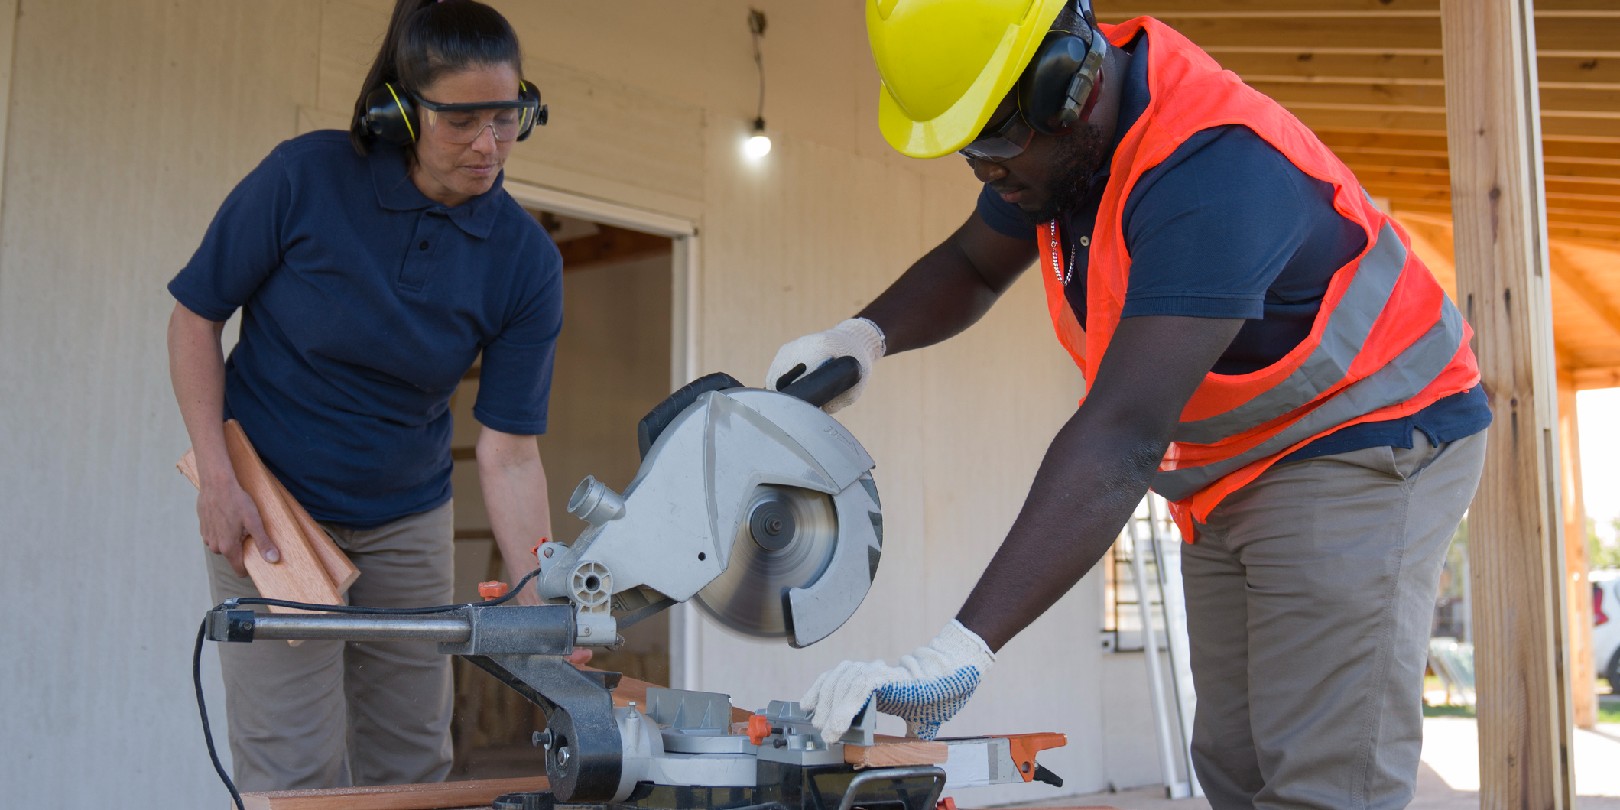 A forewoman is overseeing an afro-american worker sawing a plank during a wood frame house construction